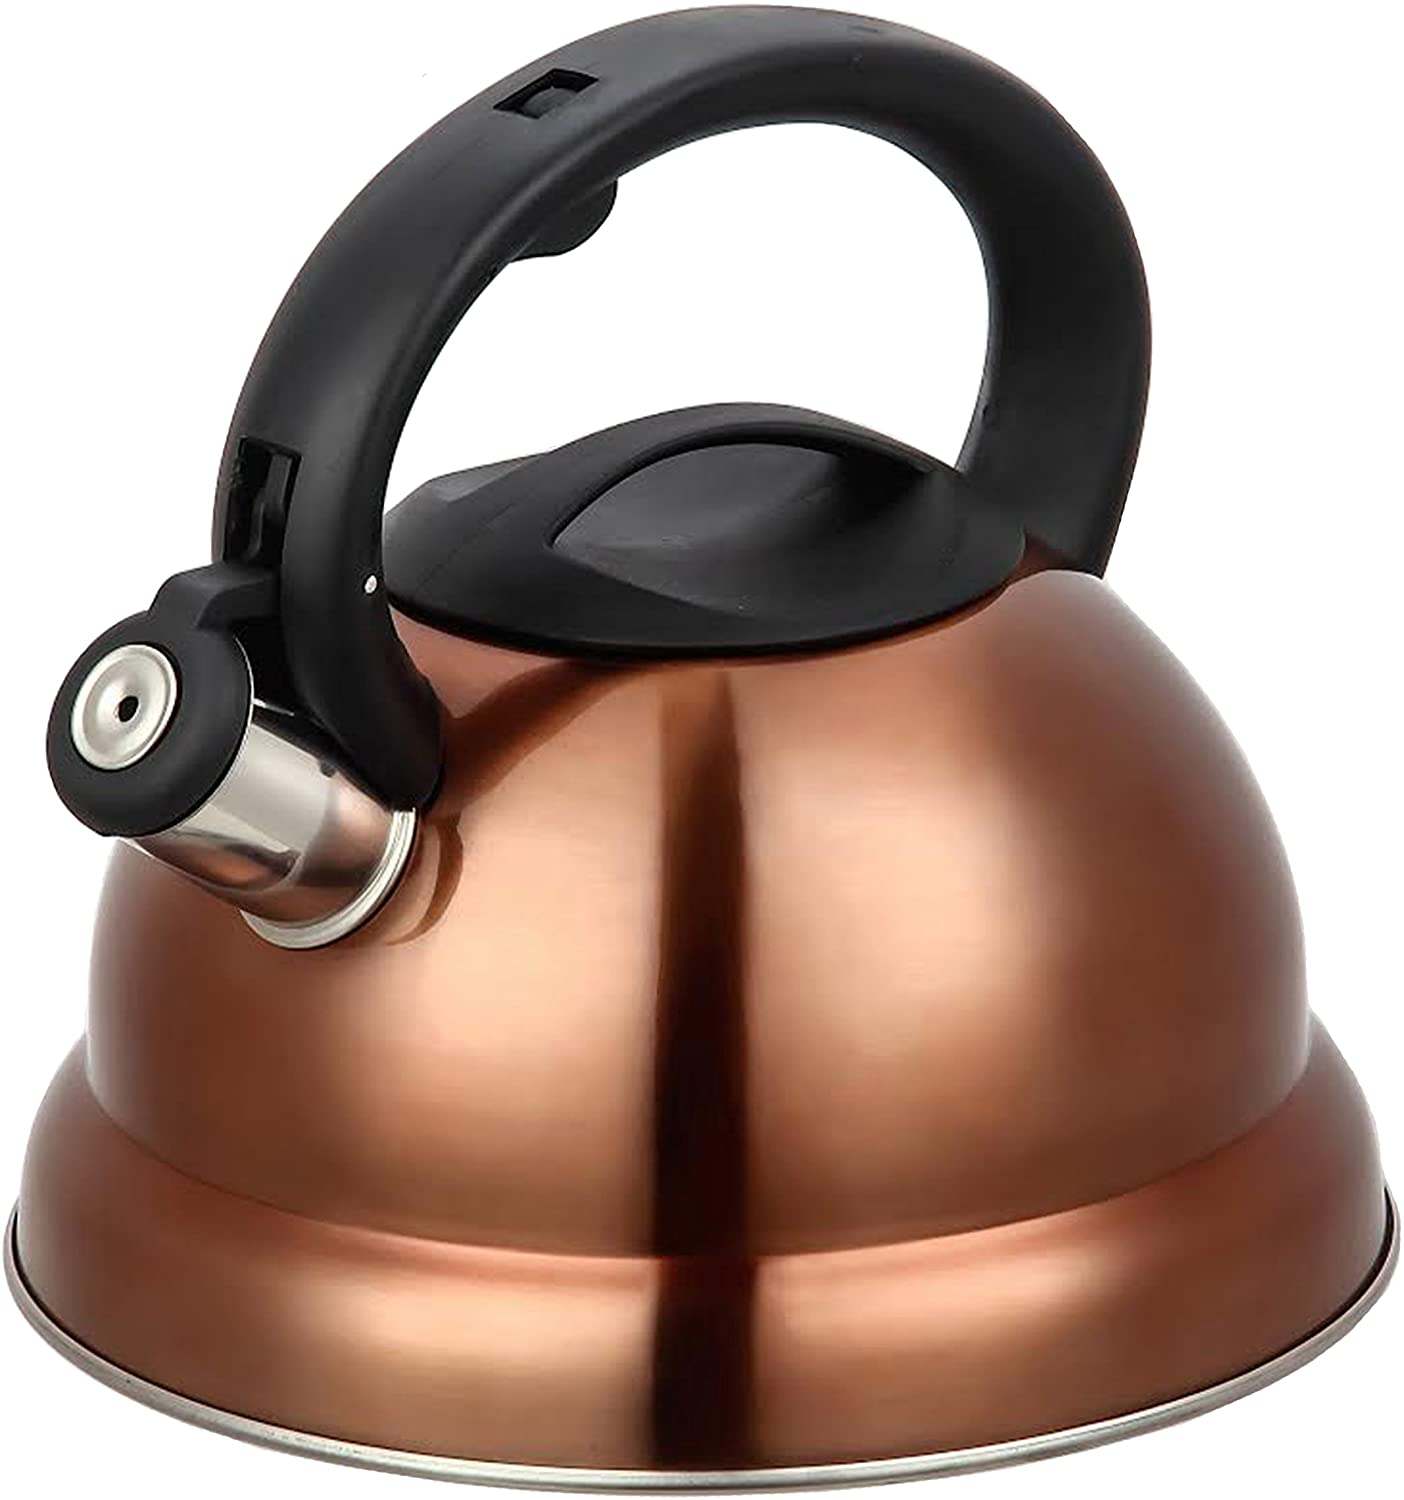 copper colored tea kettle with black handle